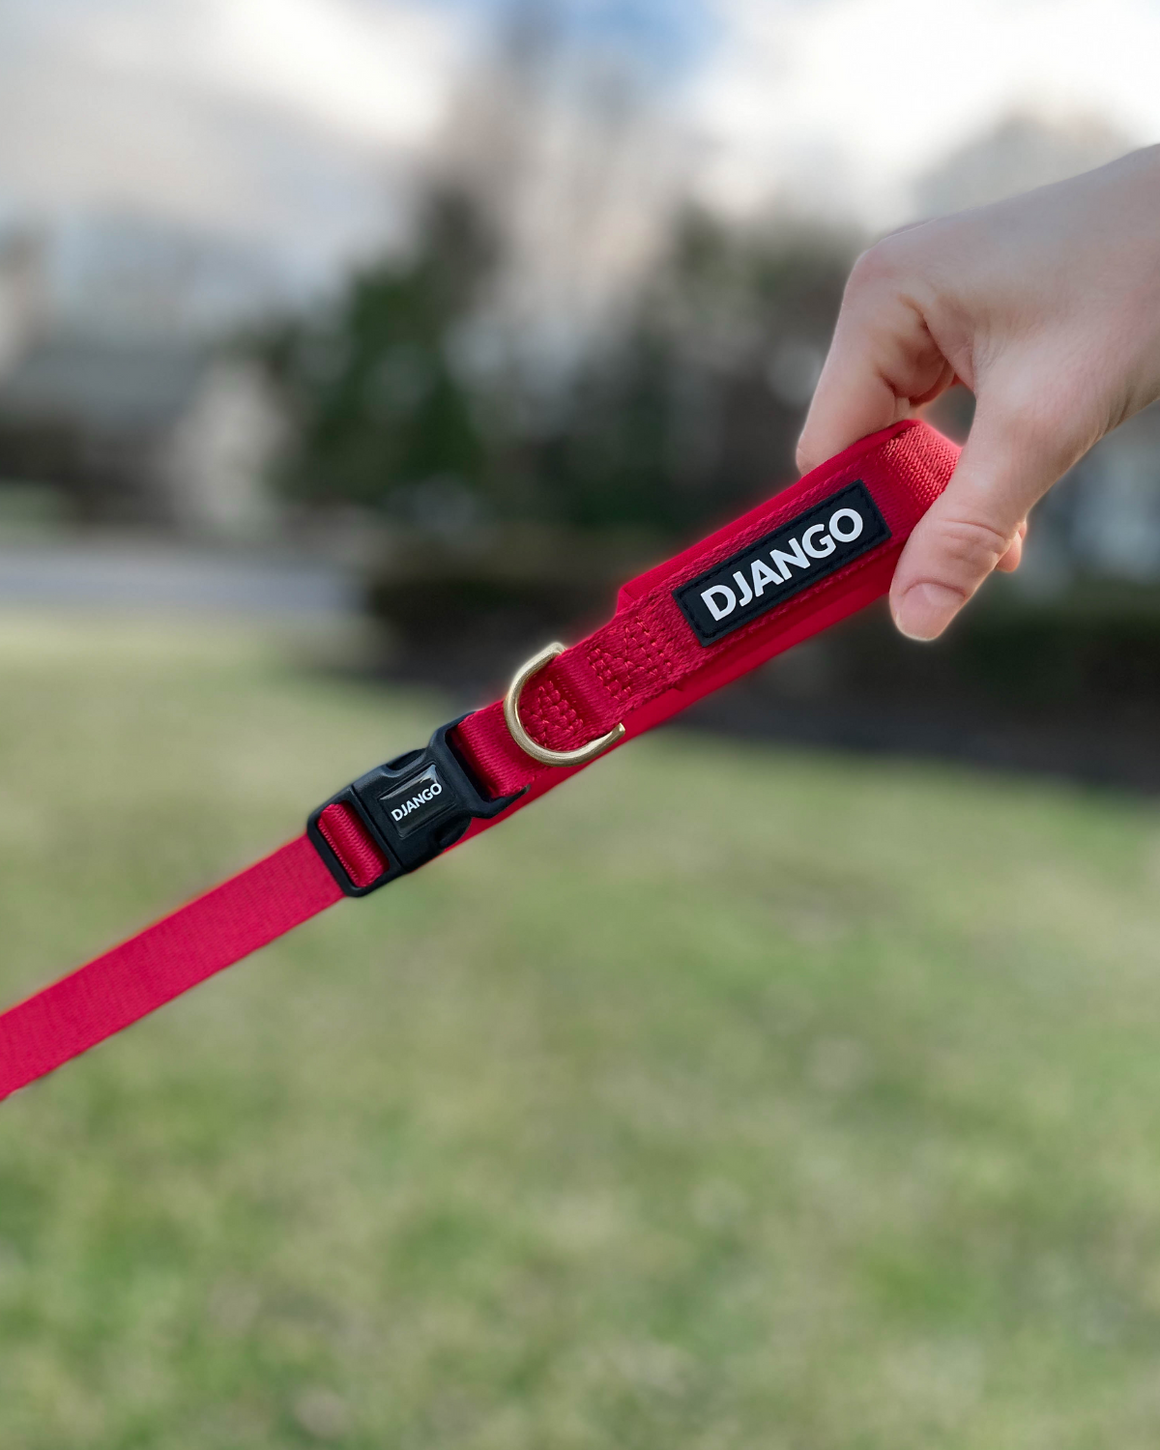 DJANGO’s Adjustable Hands-Free Adventure Dog Leash is a versatile leash that can be used as a 6.5 foot hand-held leash and an around-the-waist “hands-free” leash. The durable and stylish dog leash can also be used for temporary tie-ups (i.e. around your chair or table leg when you are out to lunch) and perfectly compliments your pup's favorite Adventure Collection harness and collar.